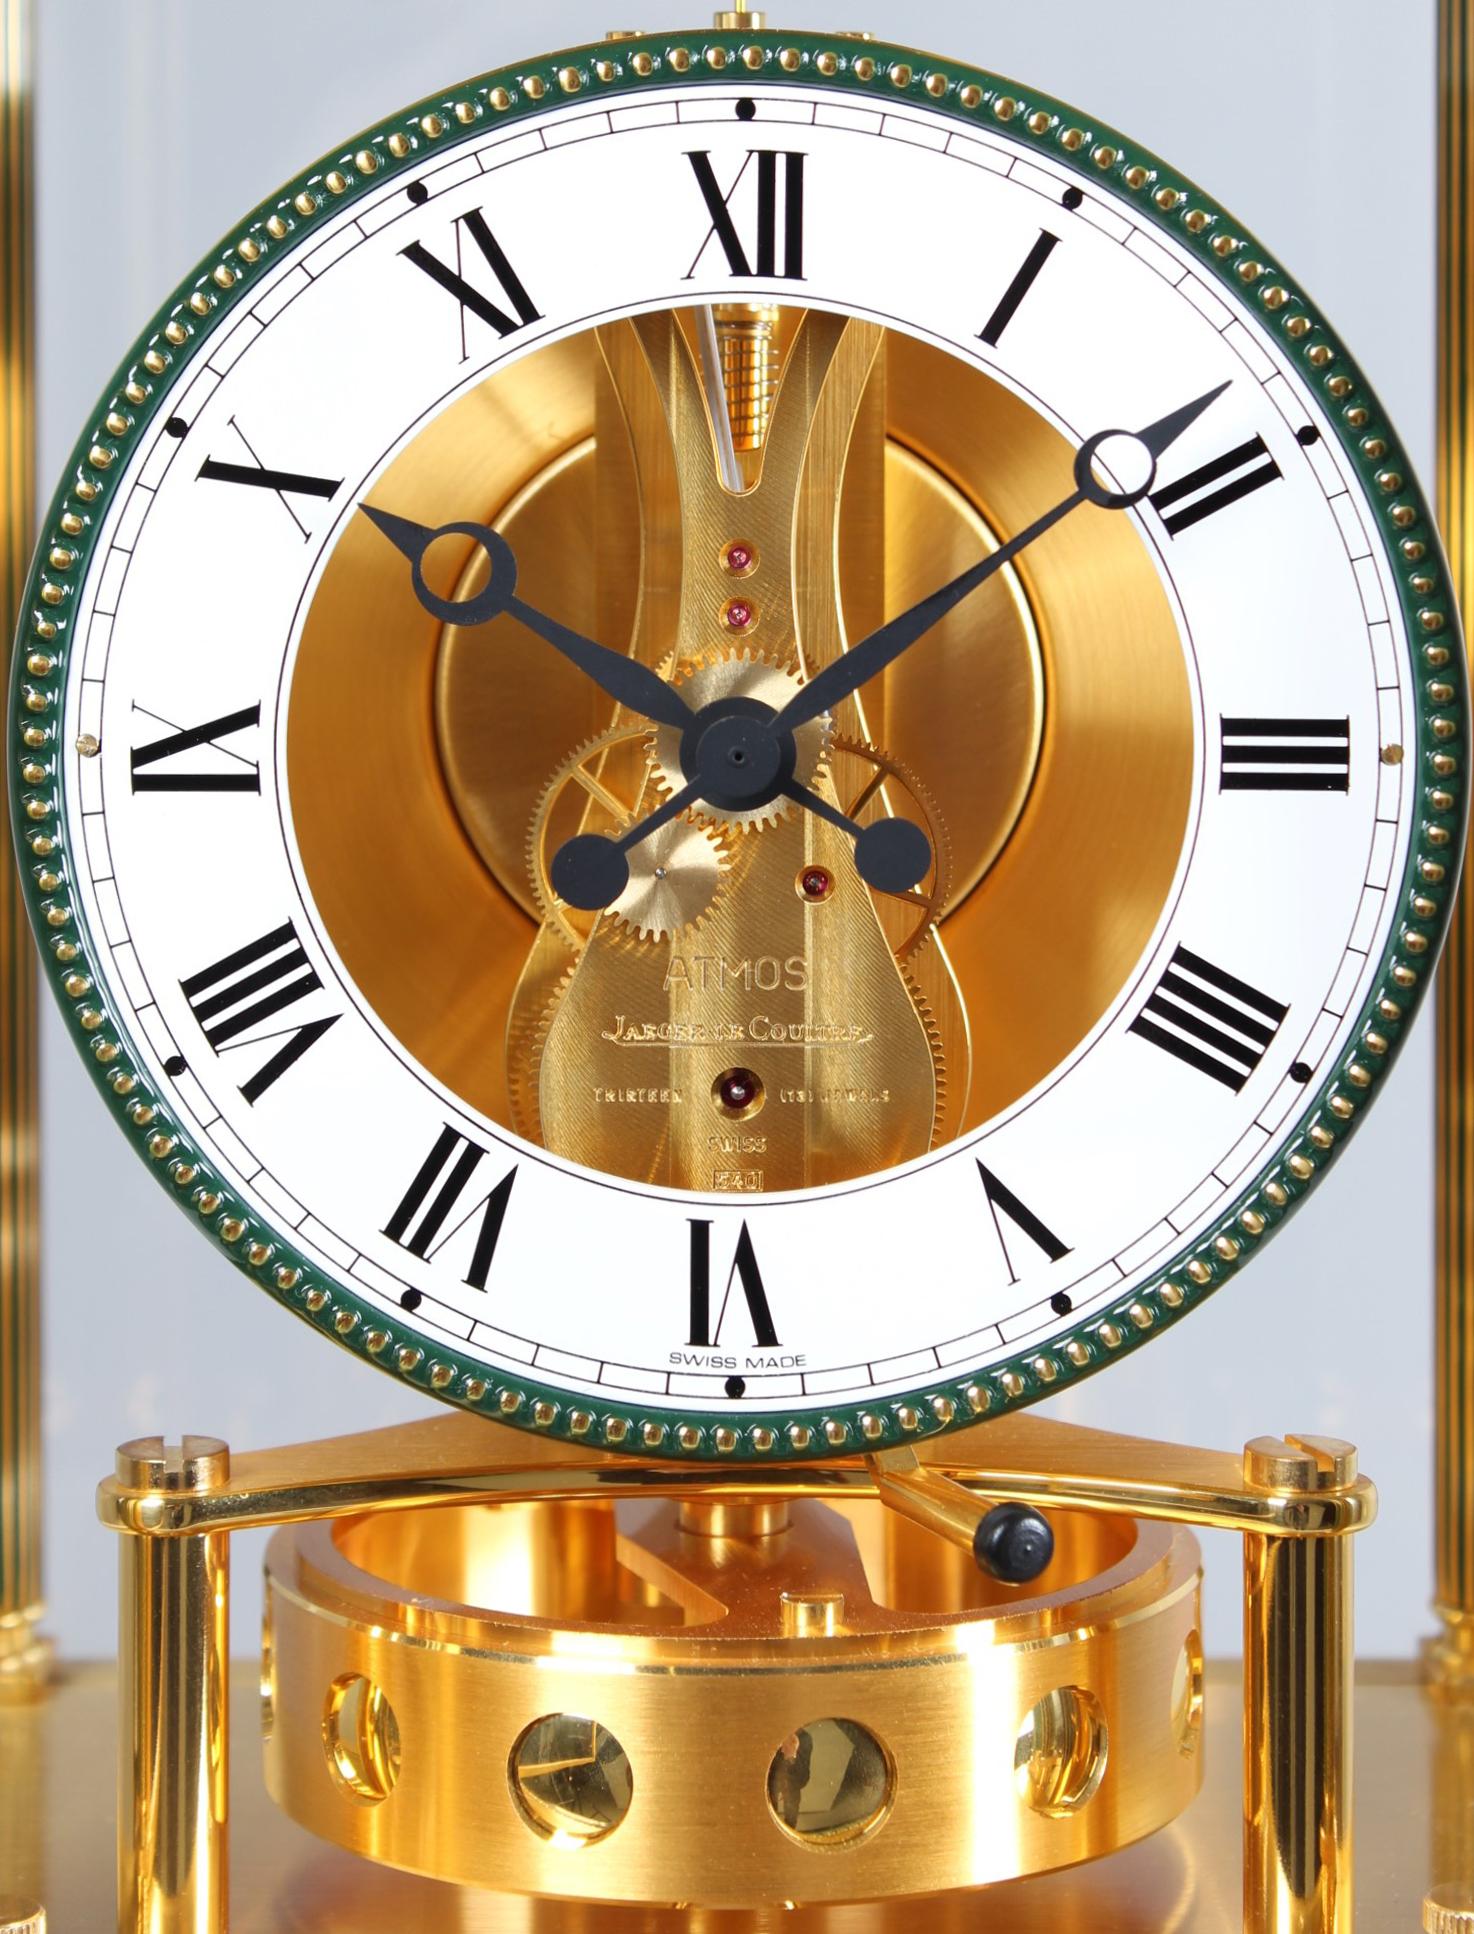 Modern Jaeger LeCoultre, Atmos Vendome, Clock Pendule, manufactured in 1994 For Sale